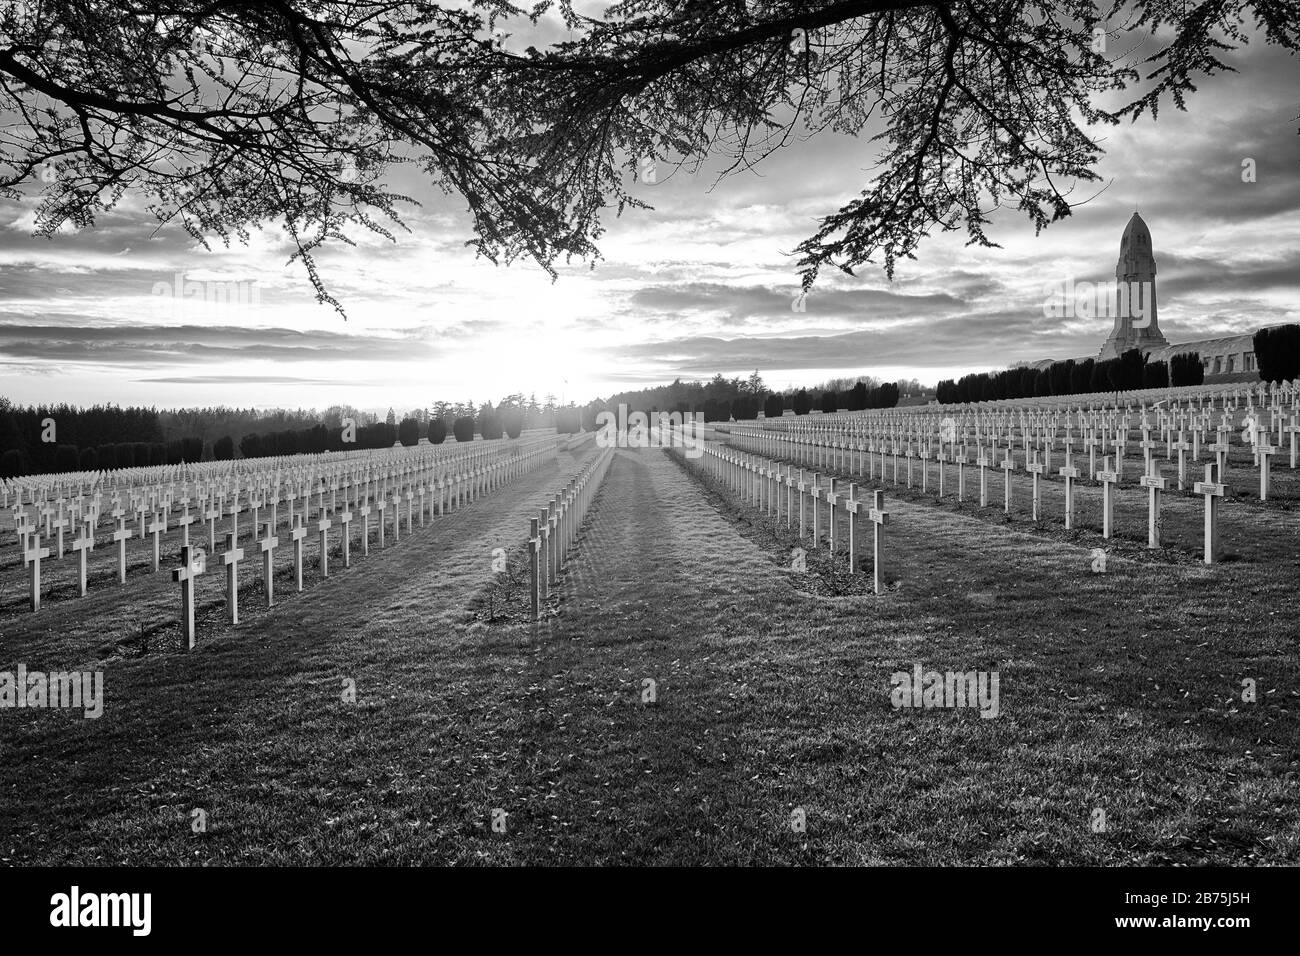 Military cemetery at Fort Douaumont from the Battle of Verdun in 1916, in the background on the right is the Douaumont Ossuary, where the bones of over 130,000 unidentified French and German soldiers are kept. [automated translation] Stock Photo